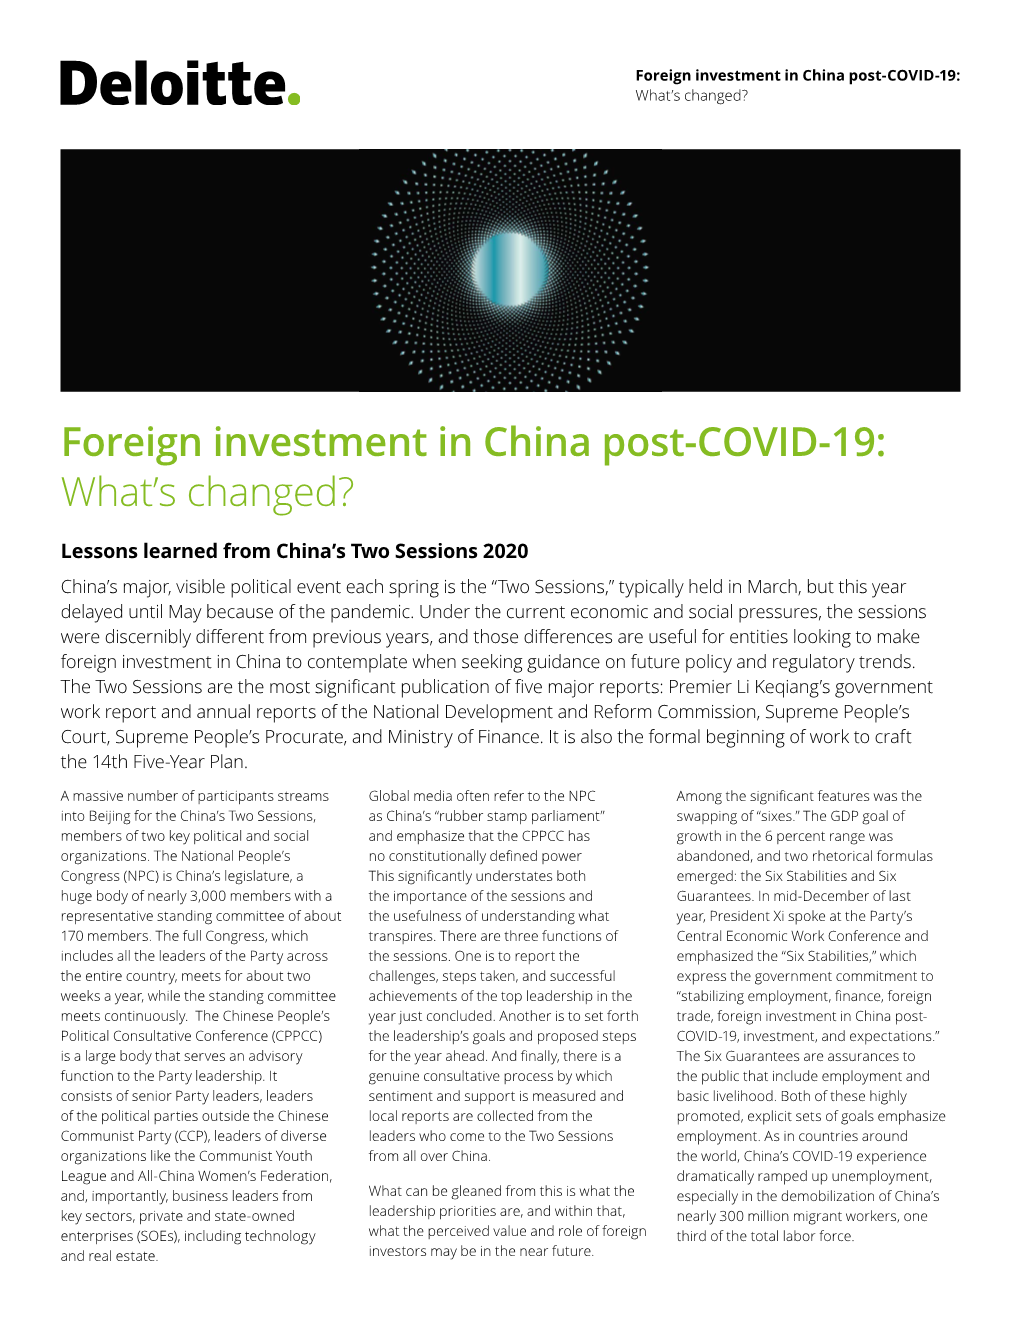 Foreign Investment in China Post-COVID-19: What’S Changed?